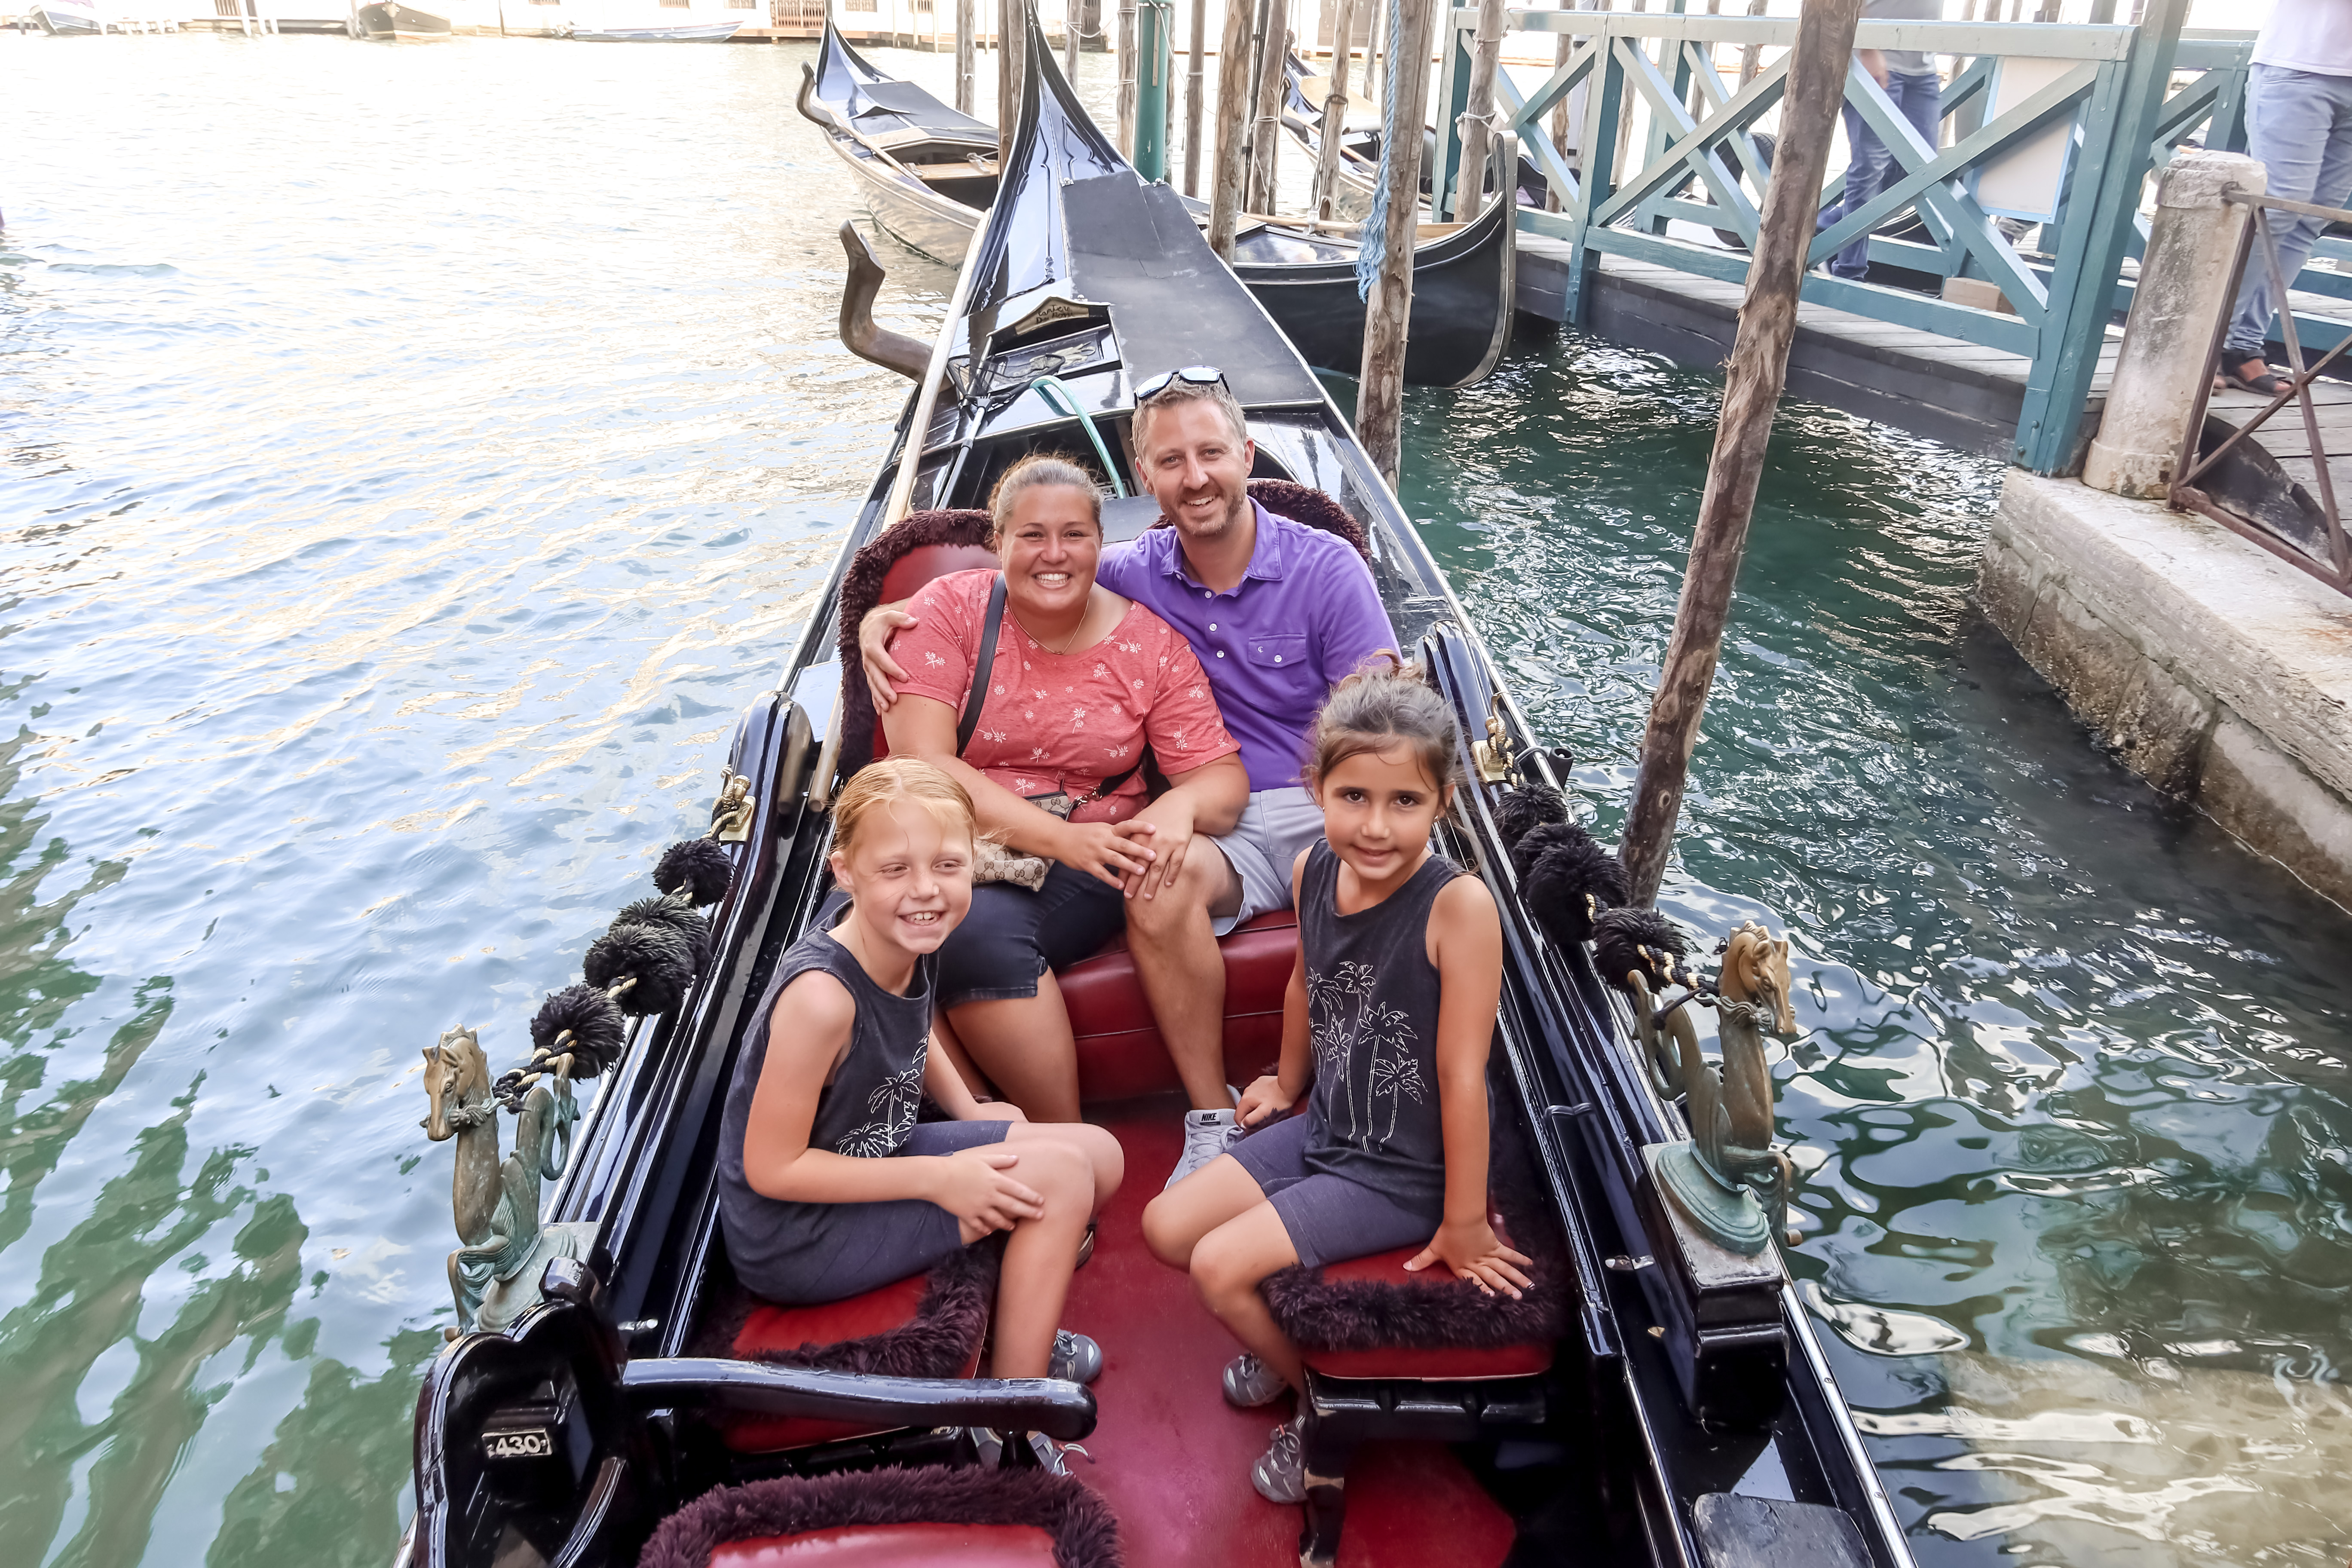 Venice Gondola Ride - One Weekend in Venice with Kids